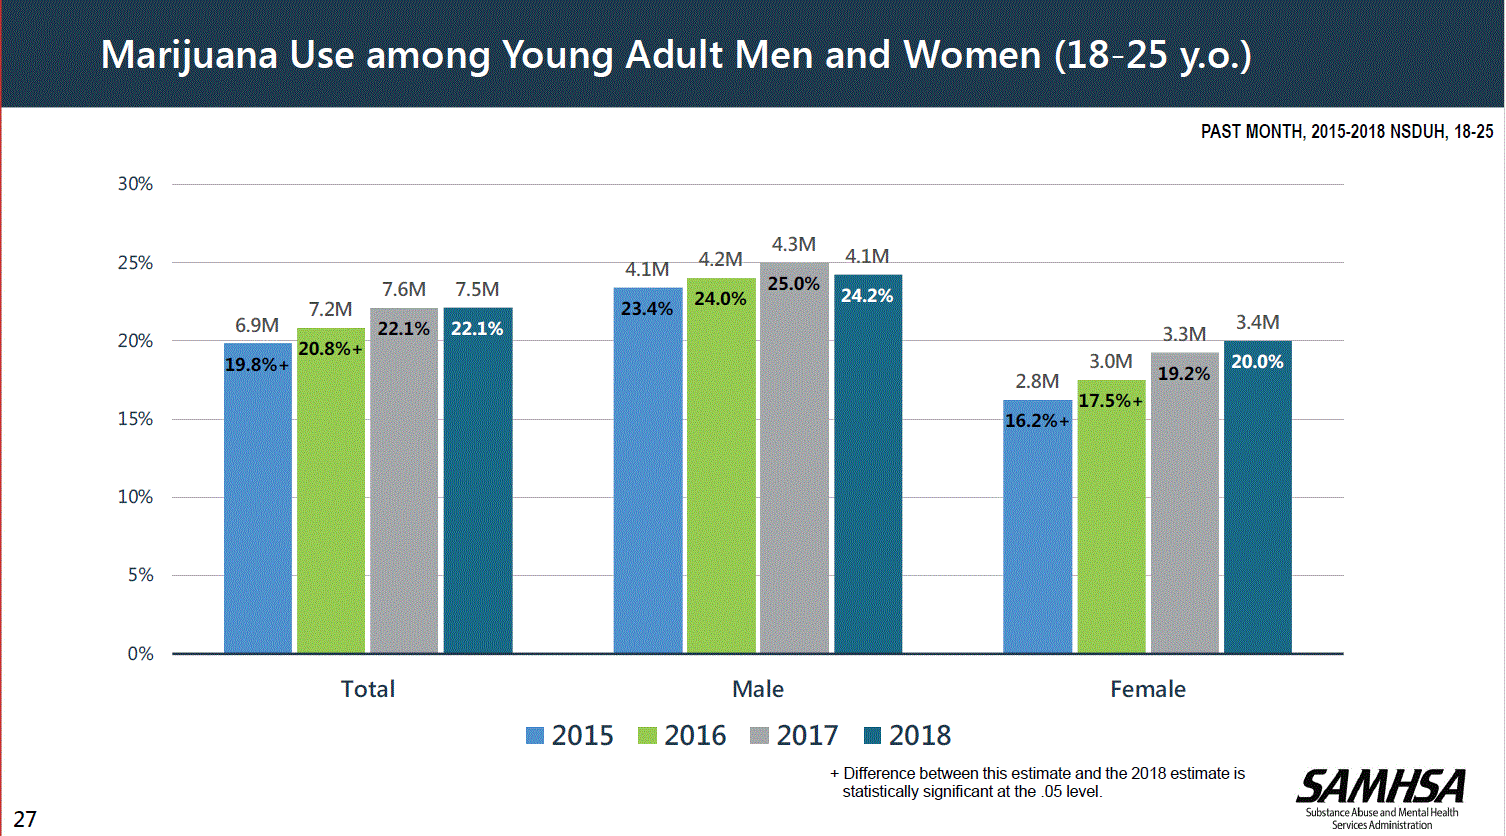 Bar graph showing Marijuana use among 18-25 year olds in 2015, 2016, 2017 and 2018. Marijuana use has risen slightly during that time, with males using the drug more than females in each year.